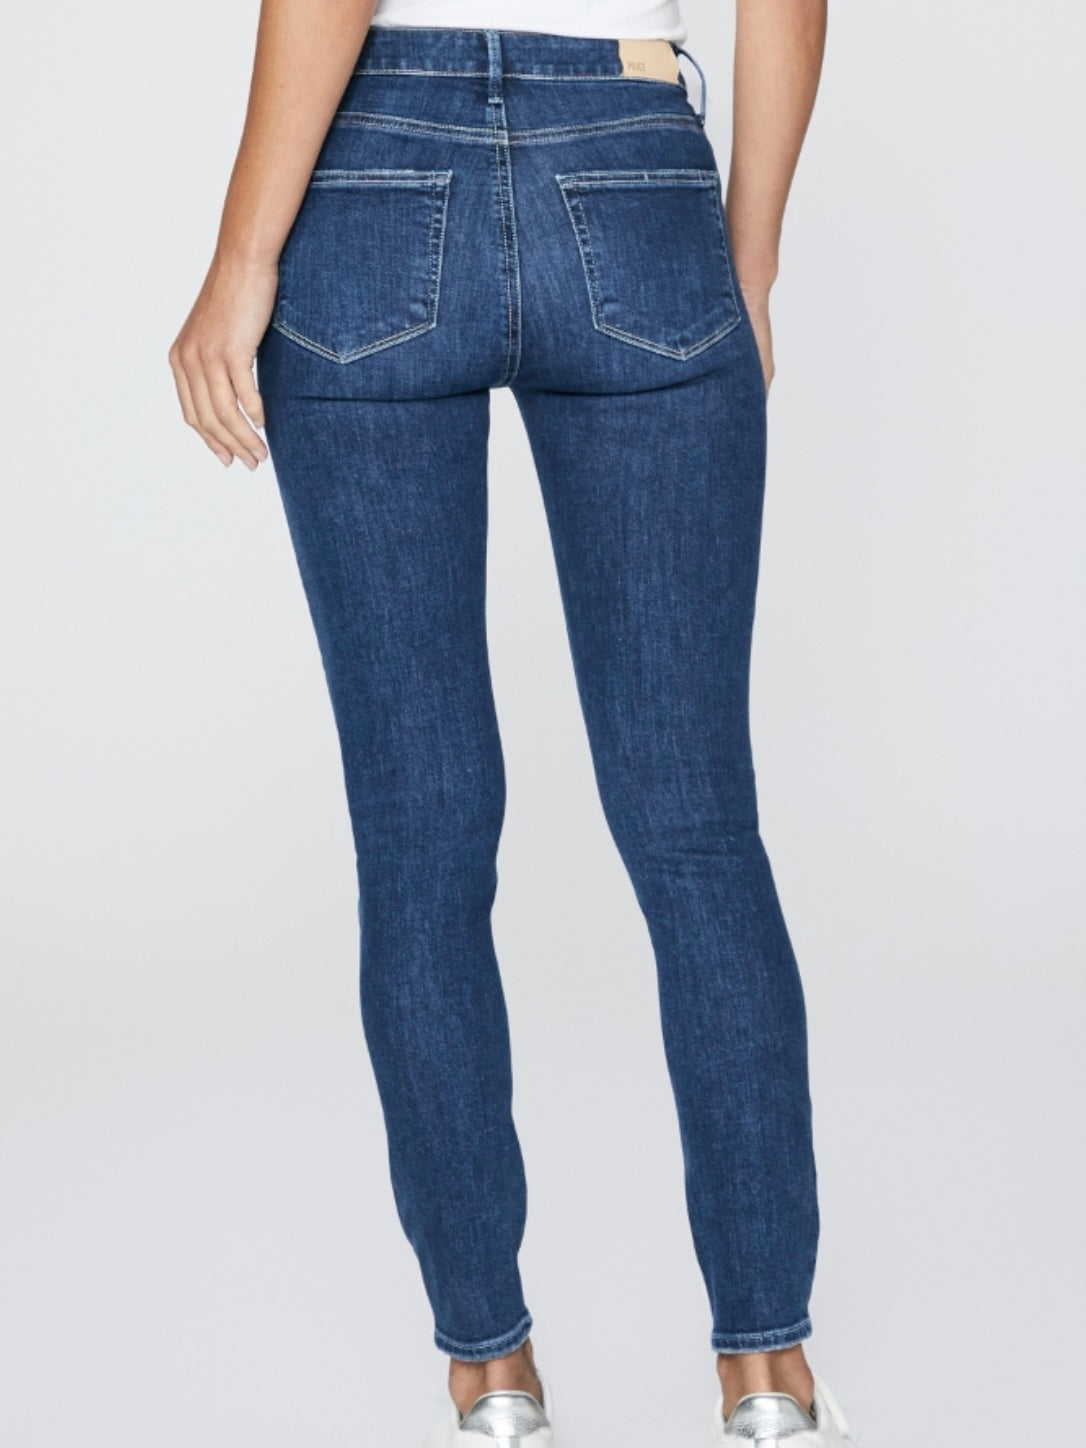 Paige Hoxton Ankle First Date Jean